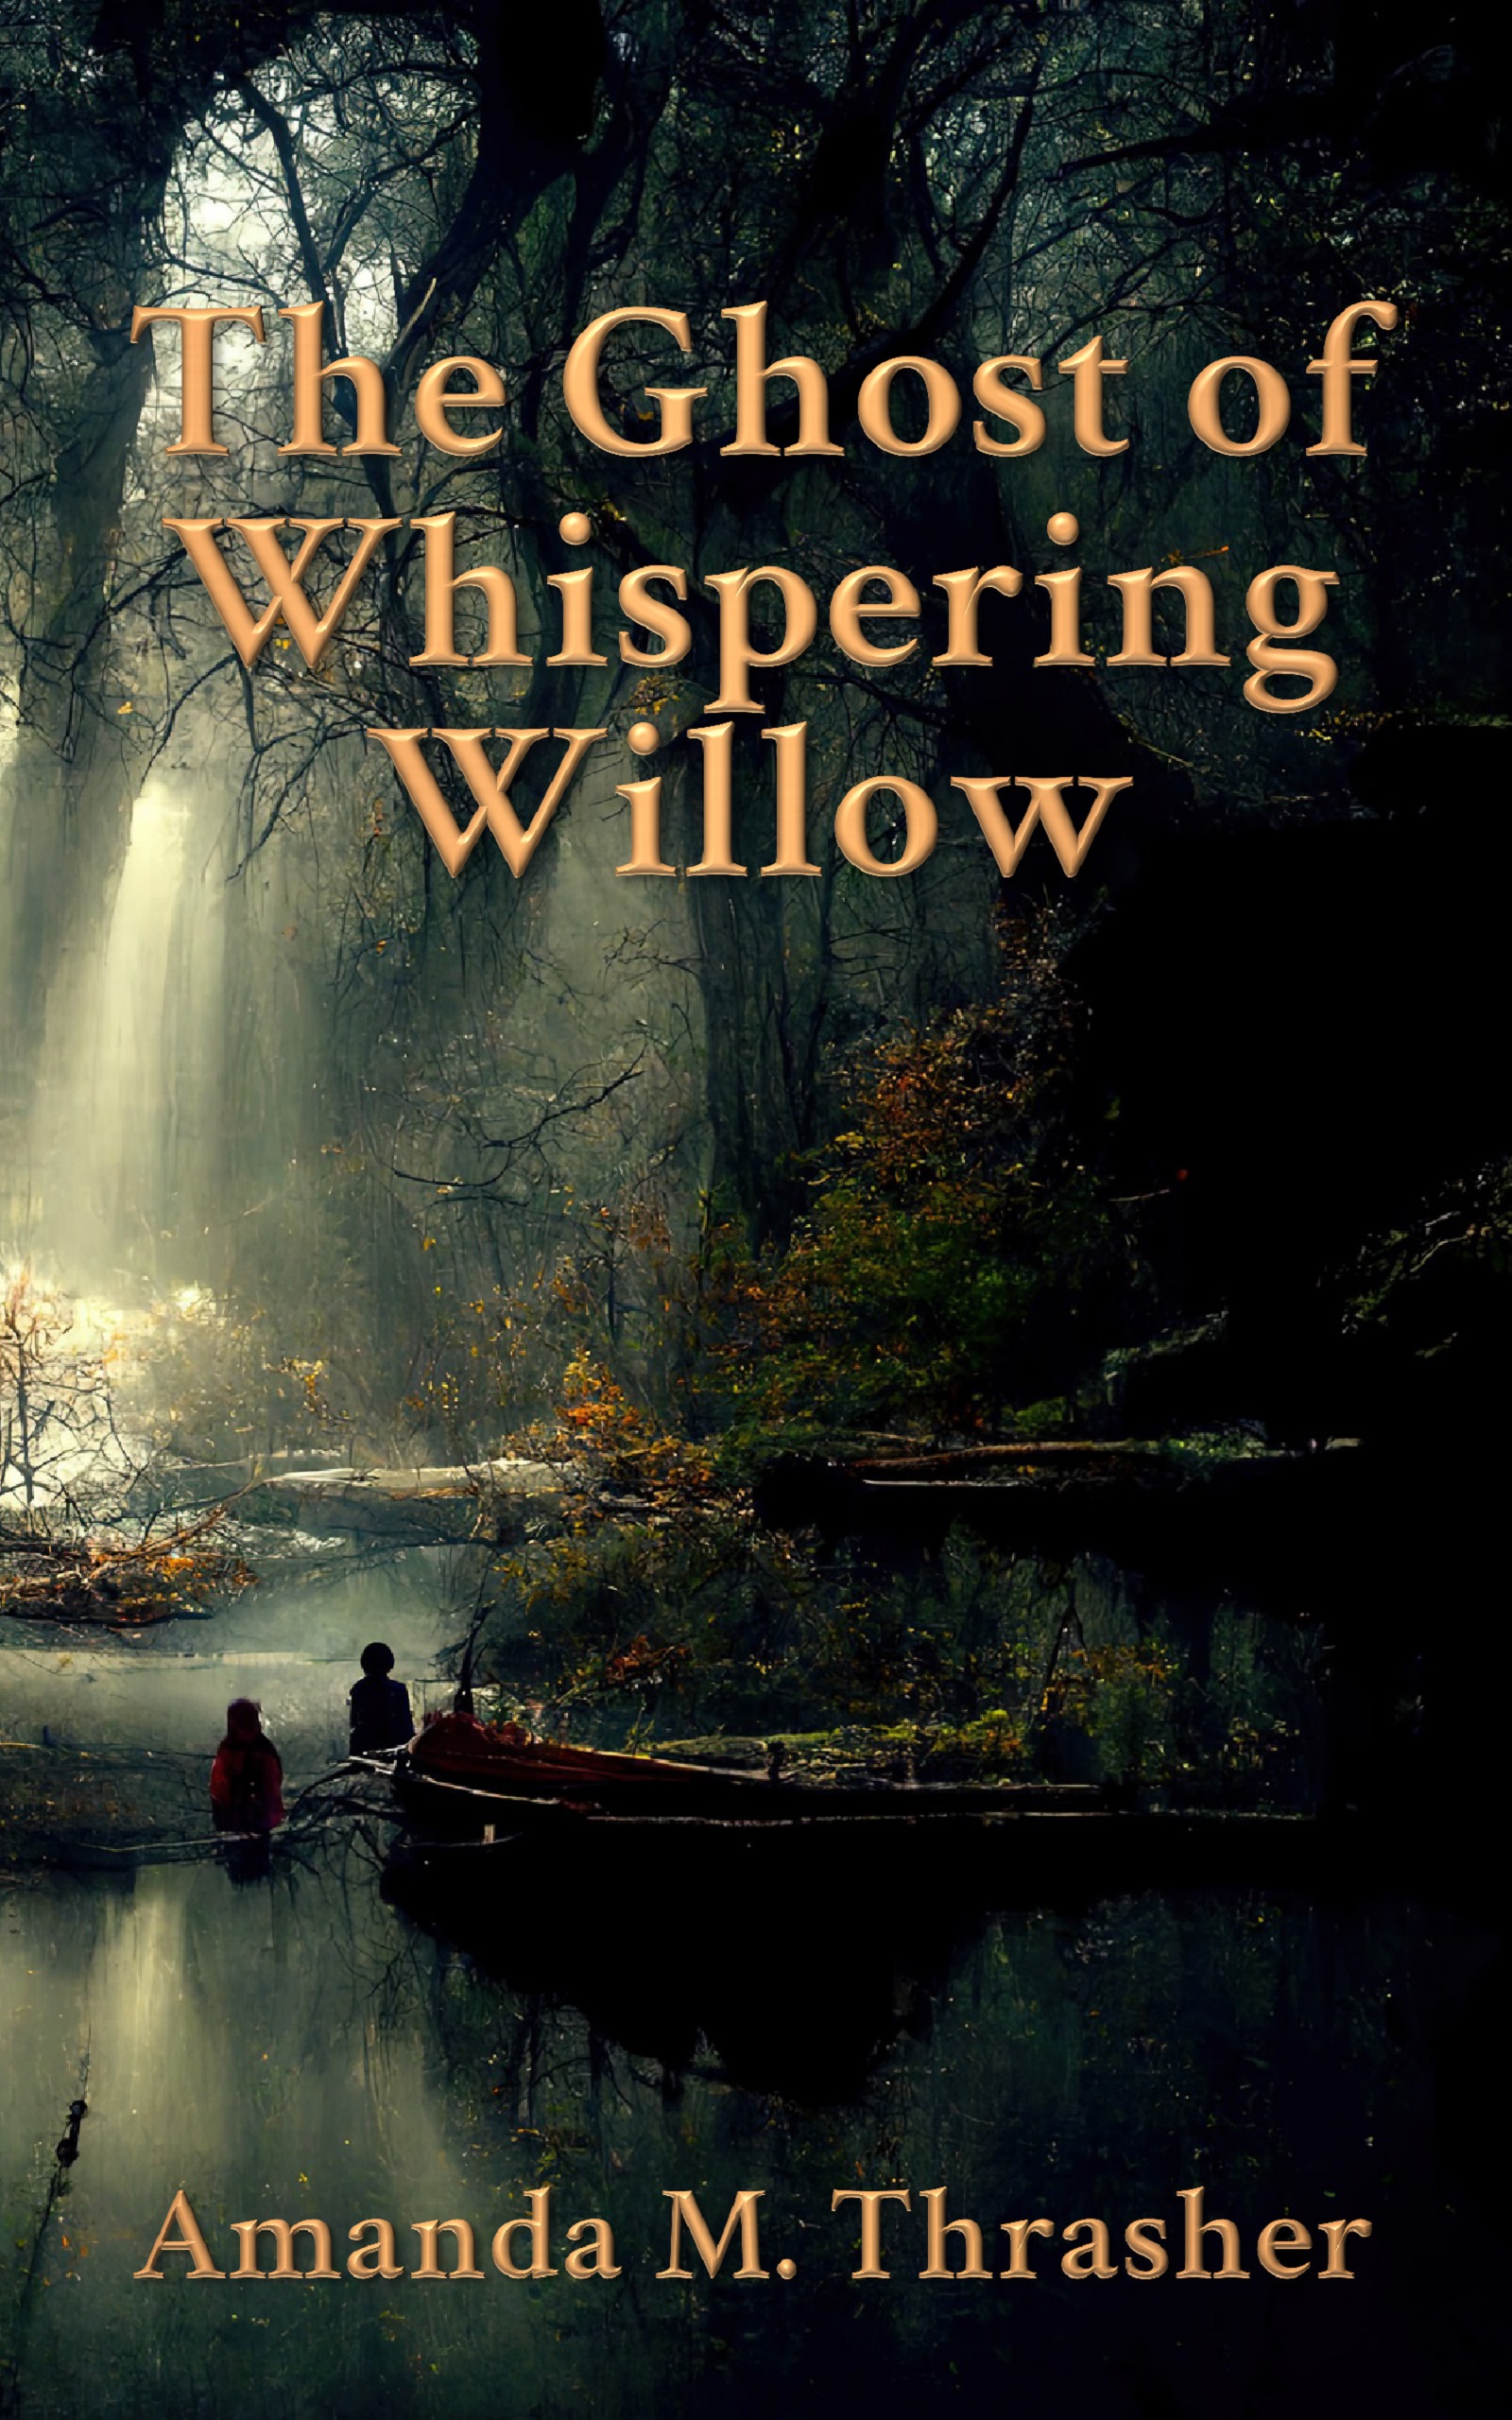 The Ghost of Whispering Willow by Amanda M. Thrasher